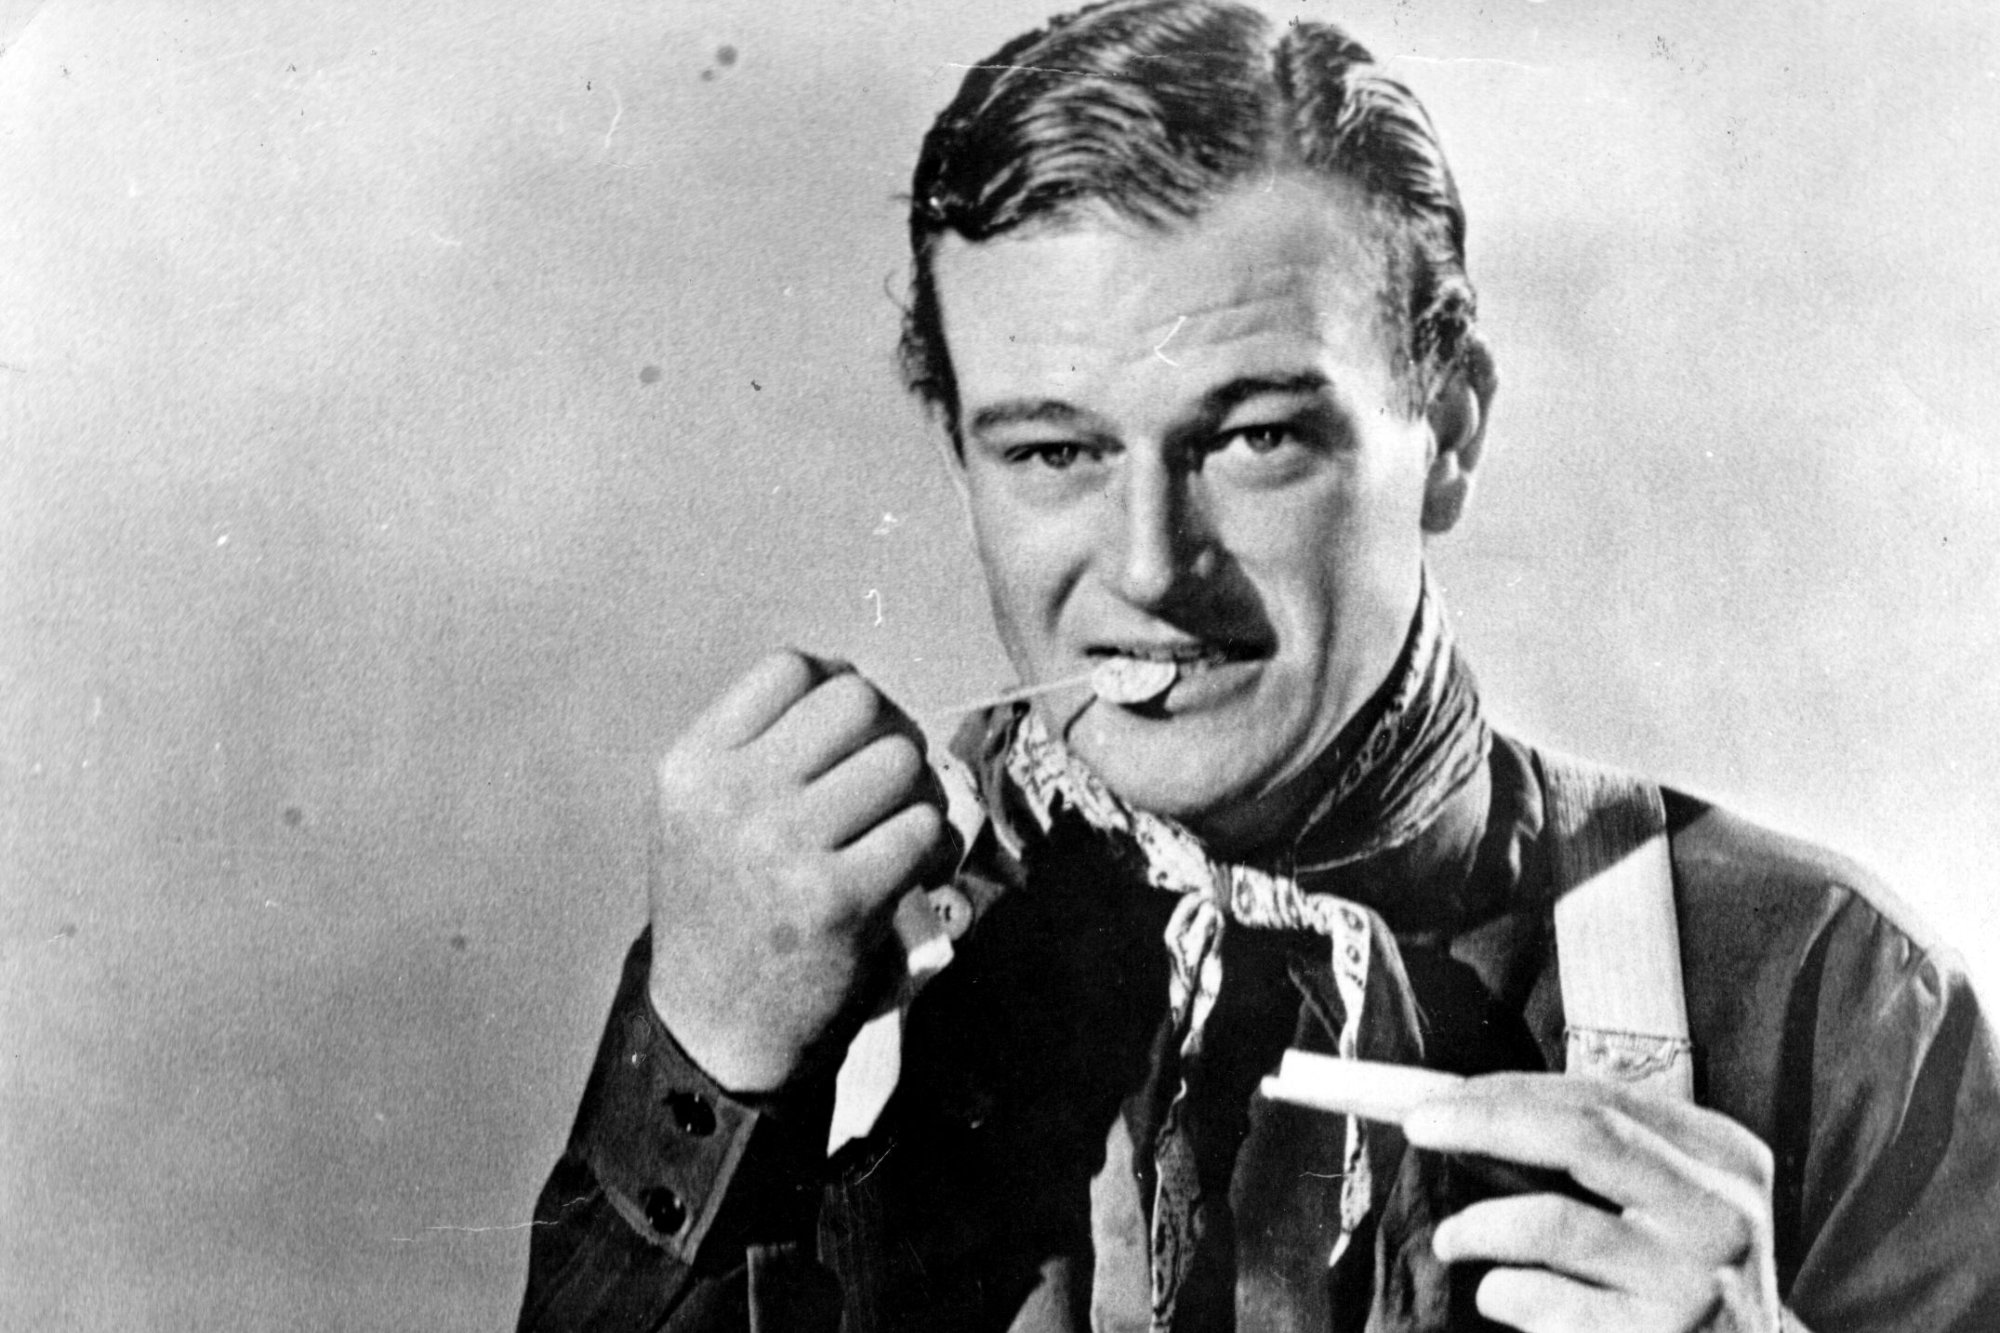 'Stagecoach' actor John Wayne, whose diet changed over time. He's holding a sphere object in his mouth and wearing a Western costume in a black-and-white picture.